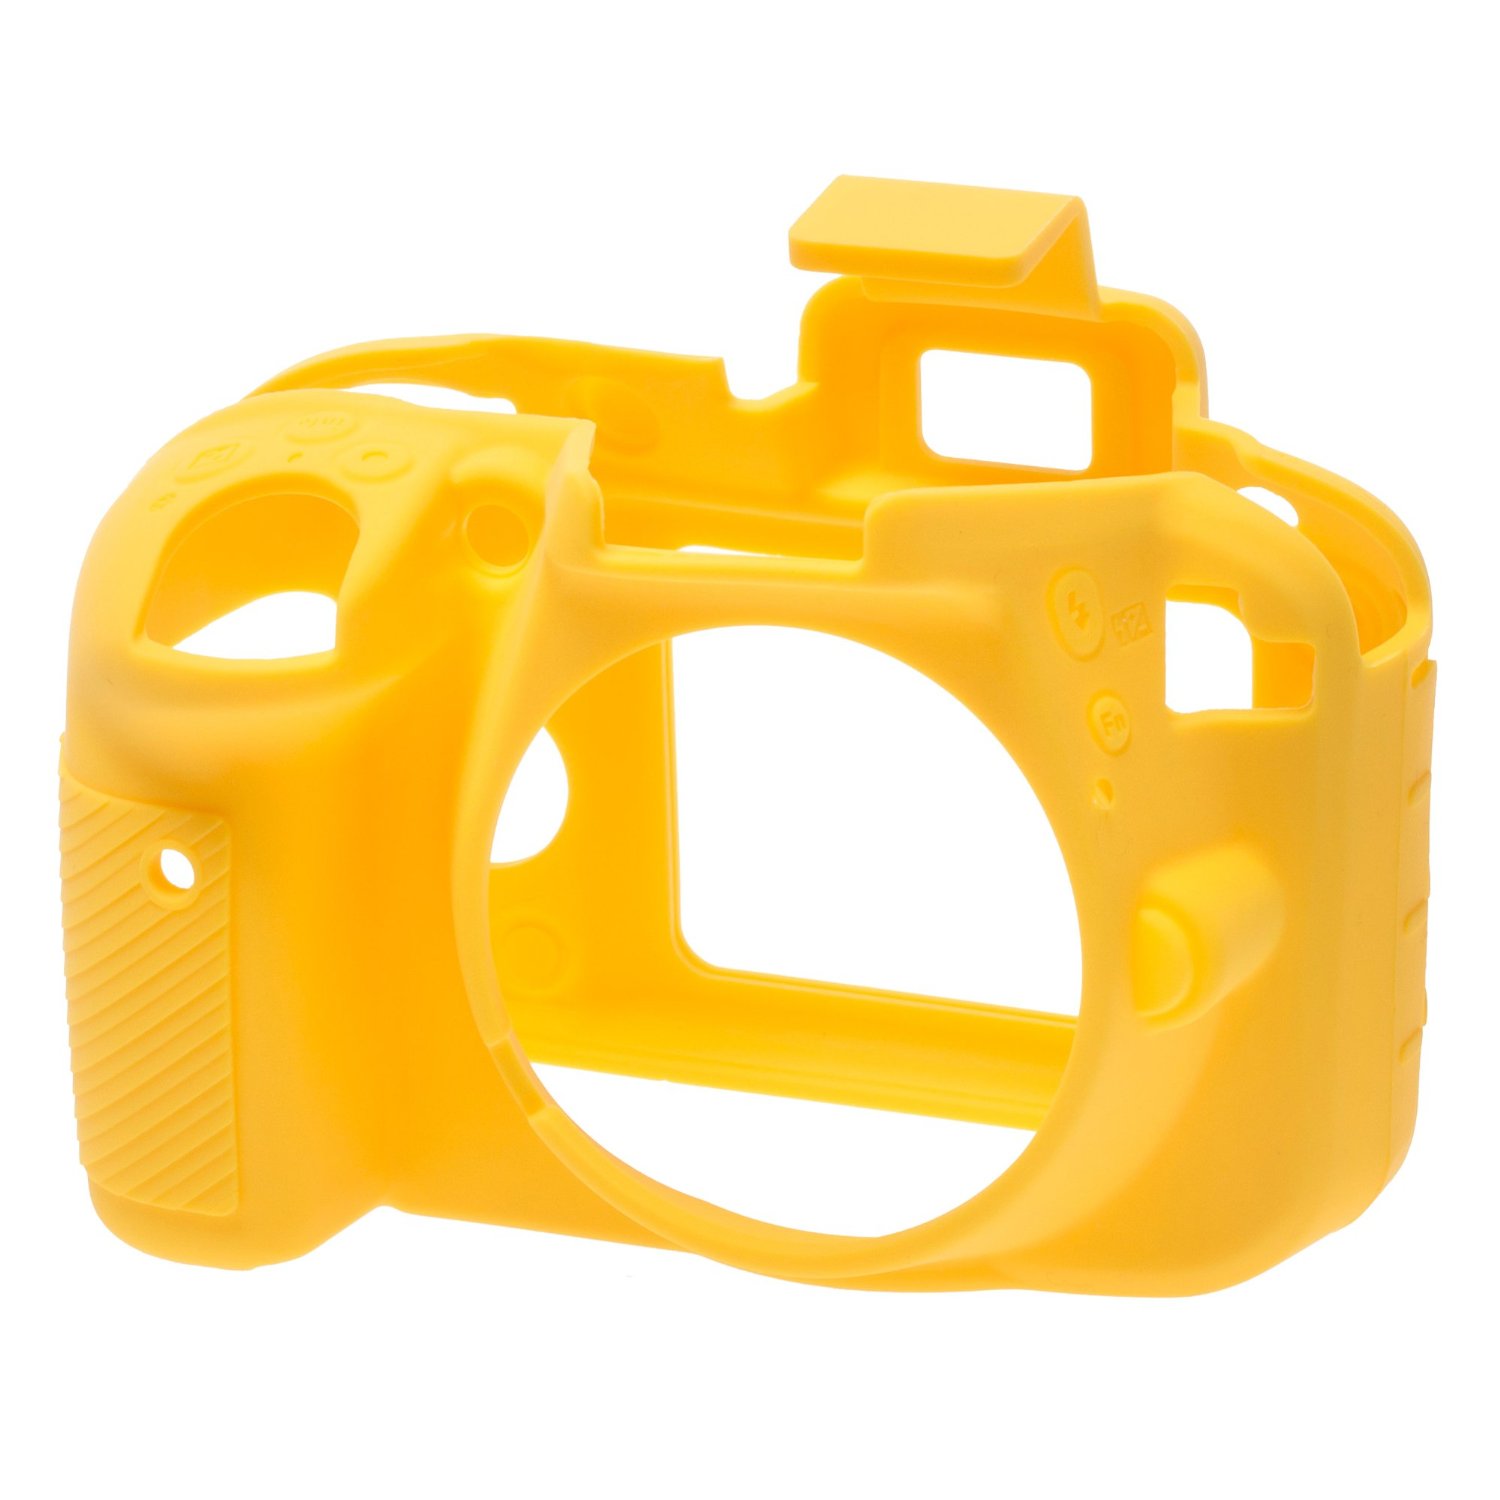 Image of Easycover bodycover for Nikon D3300 Yellow